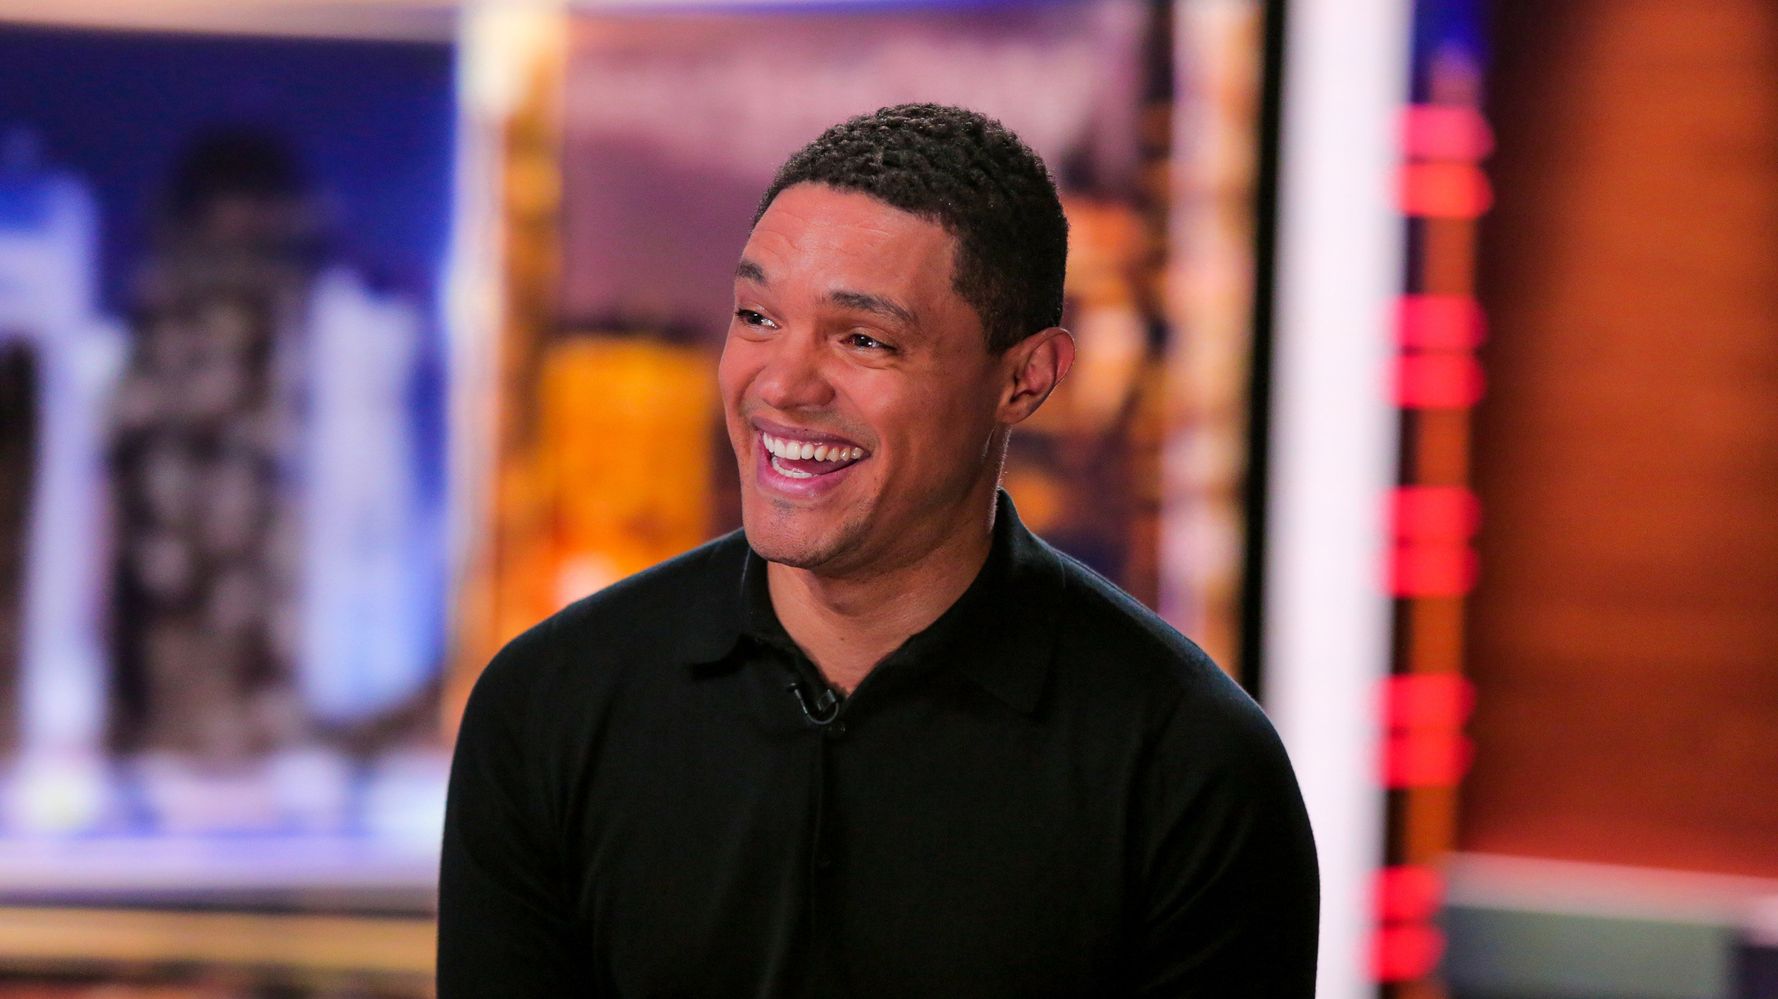 Don't If Trevor Noah Finds Aboriginal Attractive. I Do Care That They Are The Punchline. | HuffPost UK News